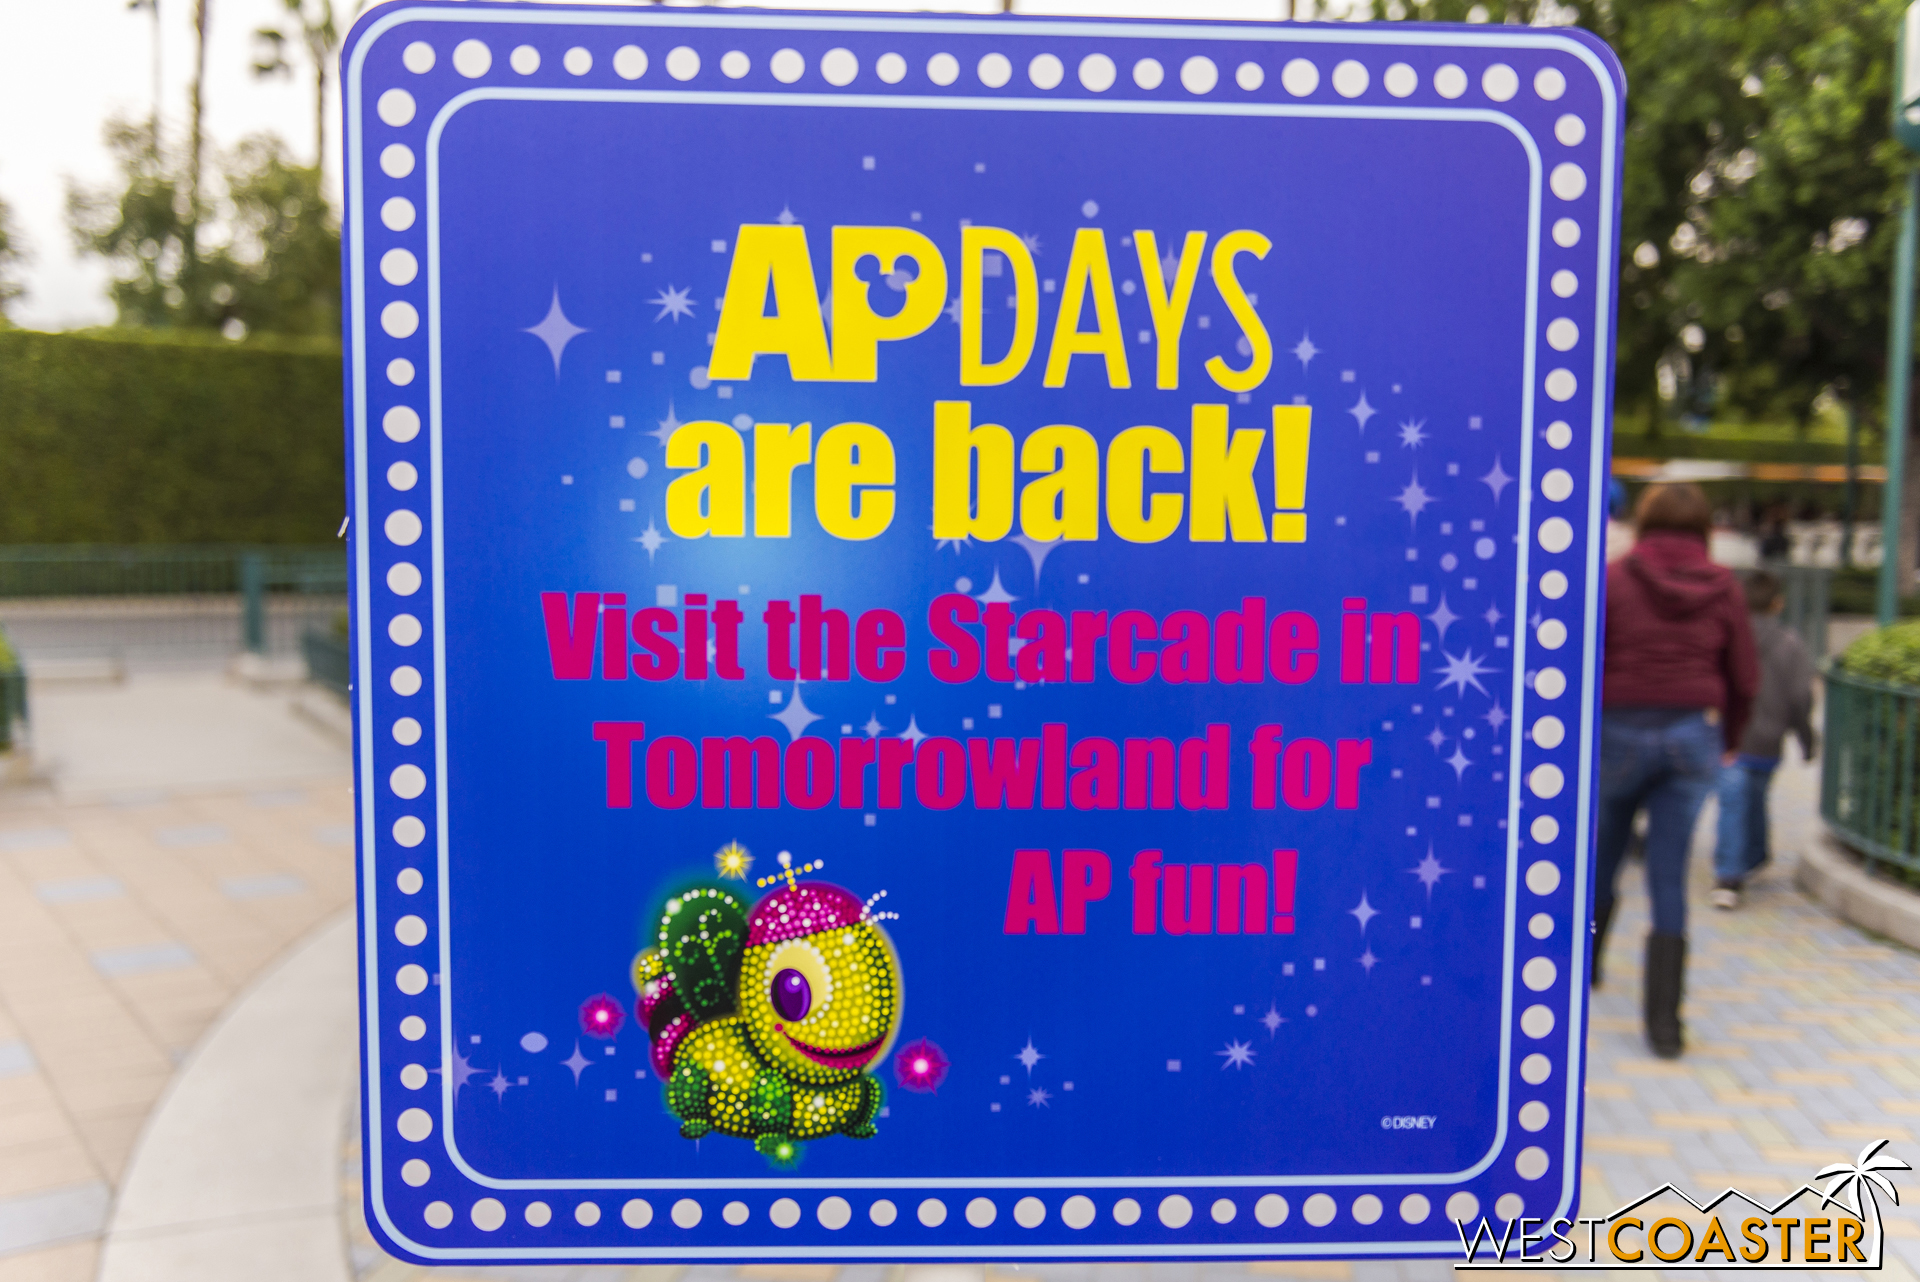  AP Days are back, and they've taken on a Main Street Electrical Parade theme this year. 